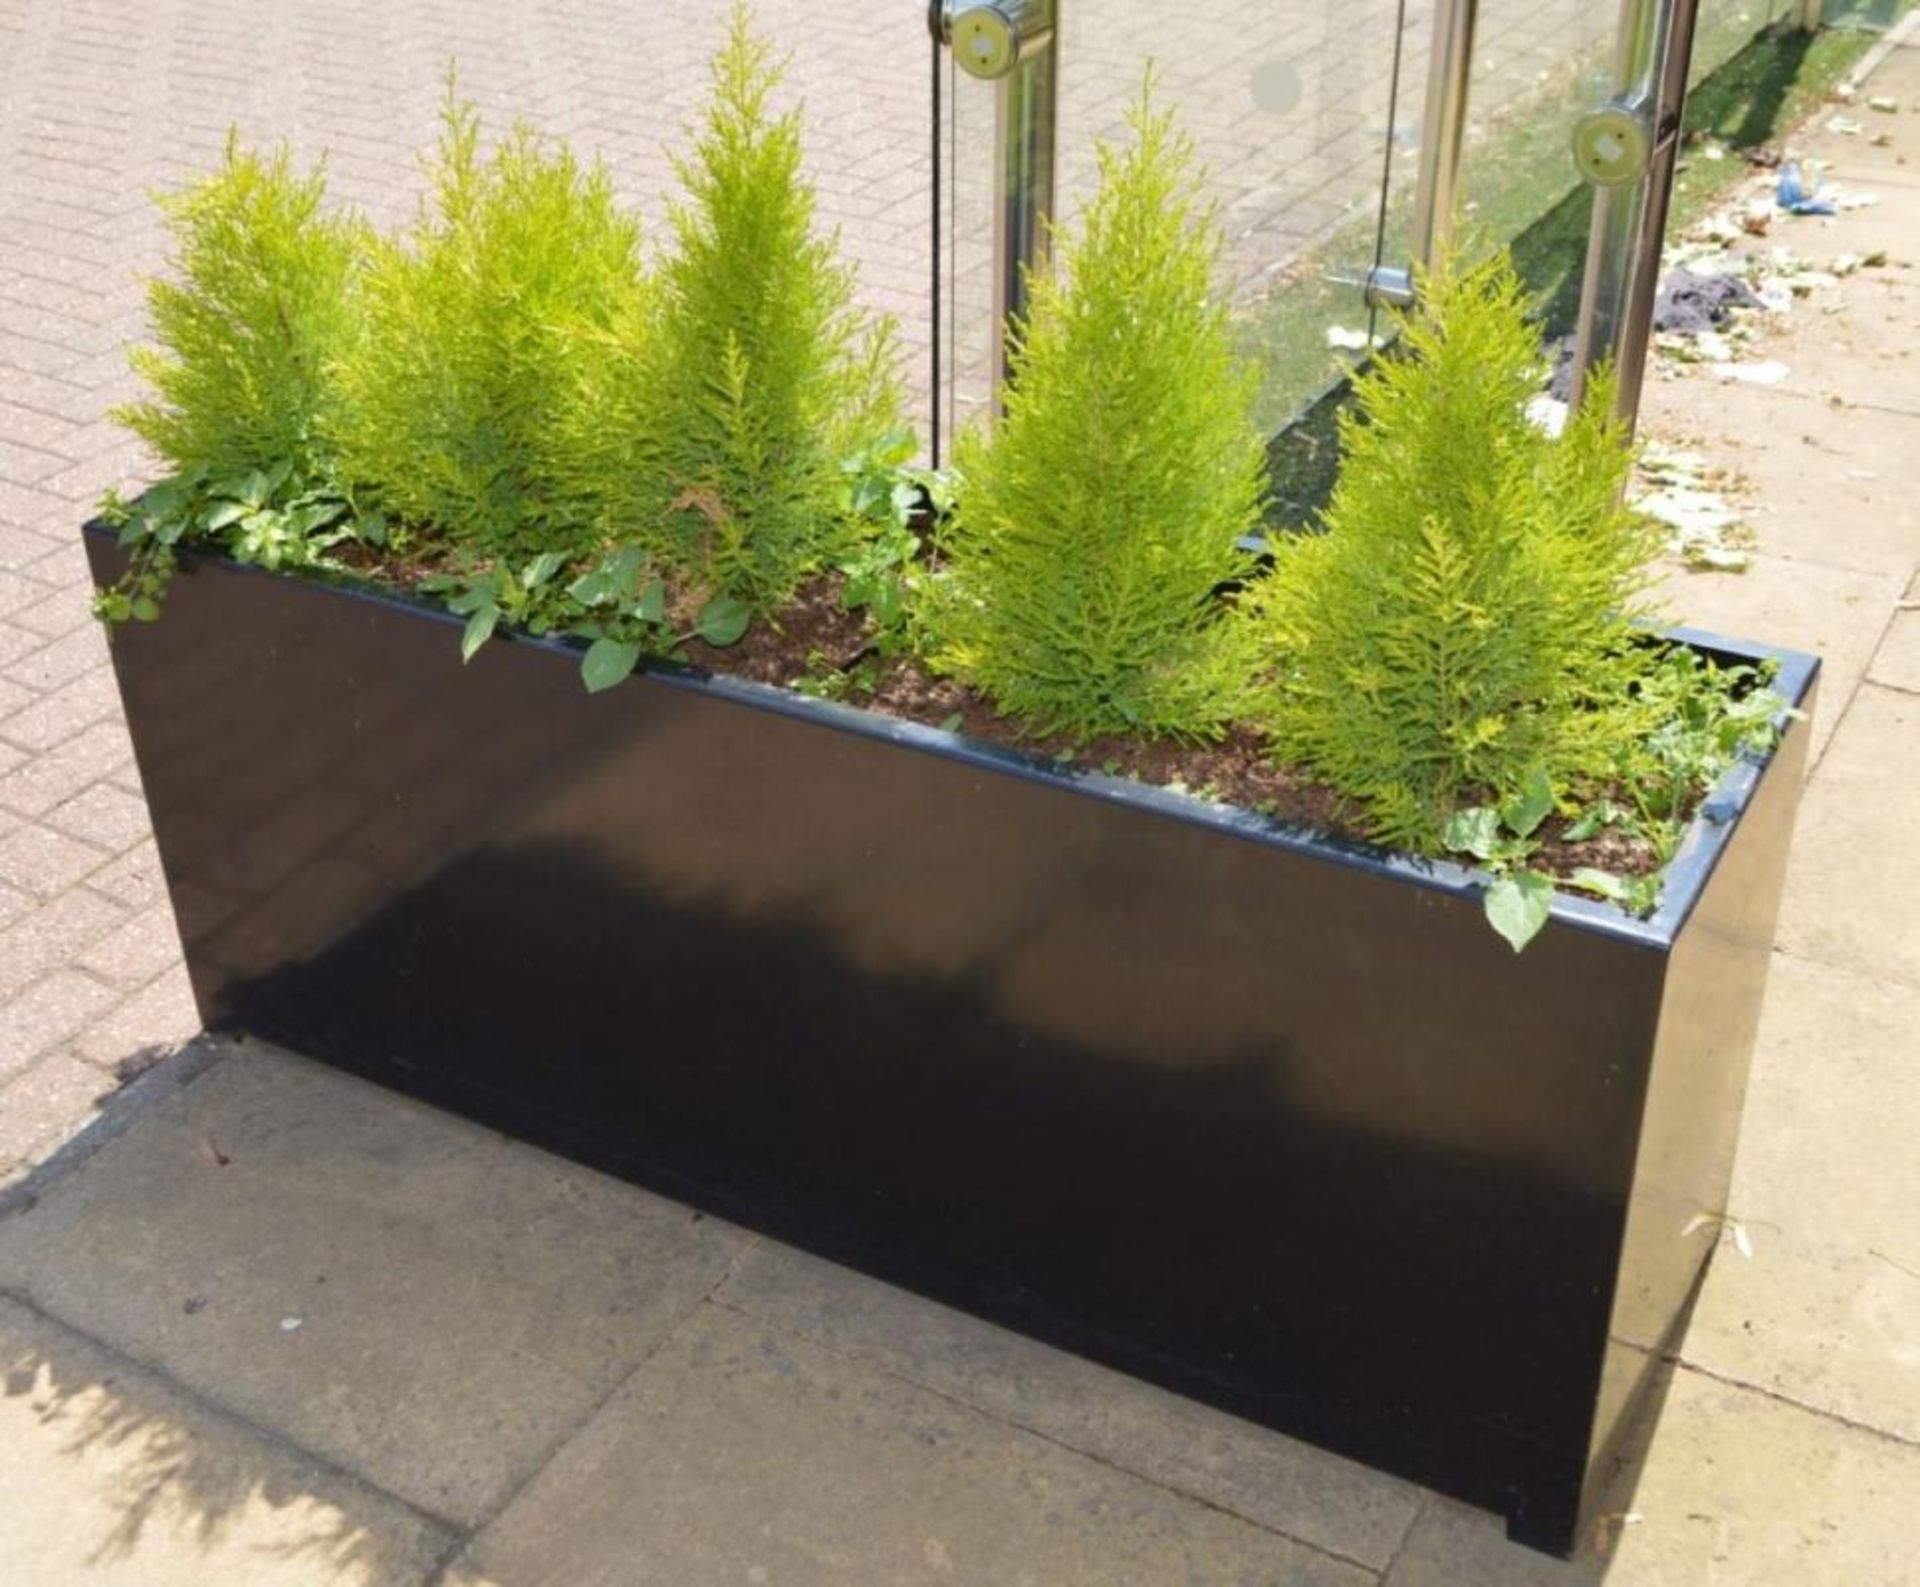 1 x Rectangular Outdoor Planter in Black With Small Conifer Trees - Planter Size H55 x W136 x D41 - Image 4 of 4